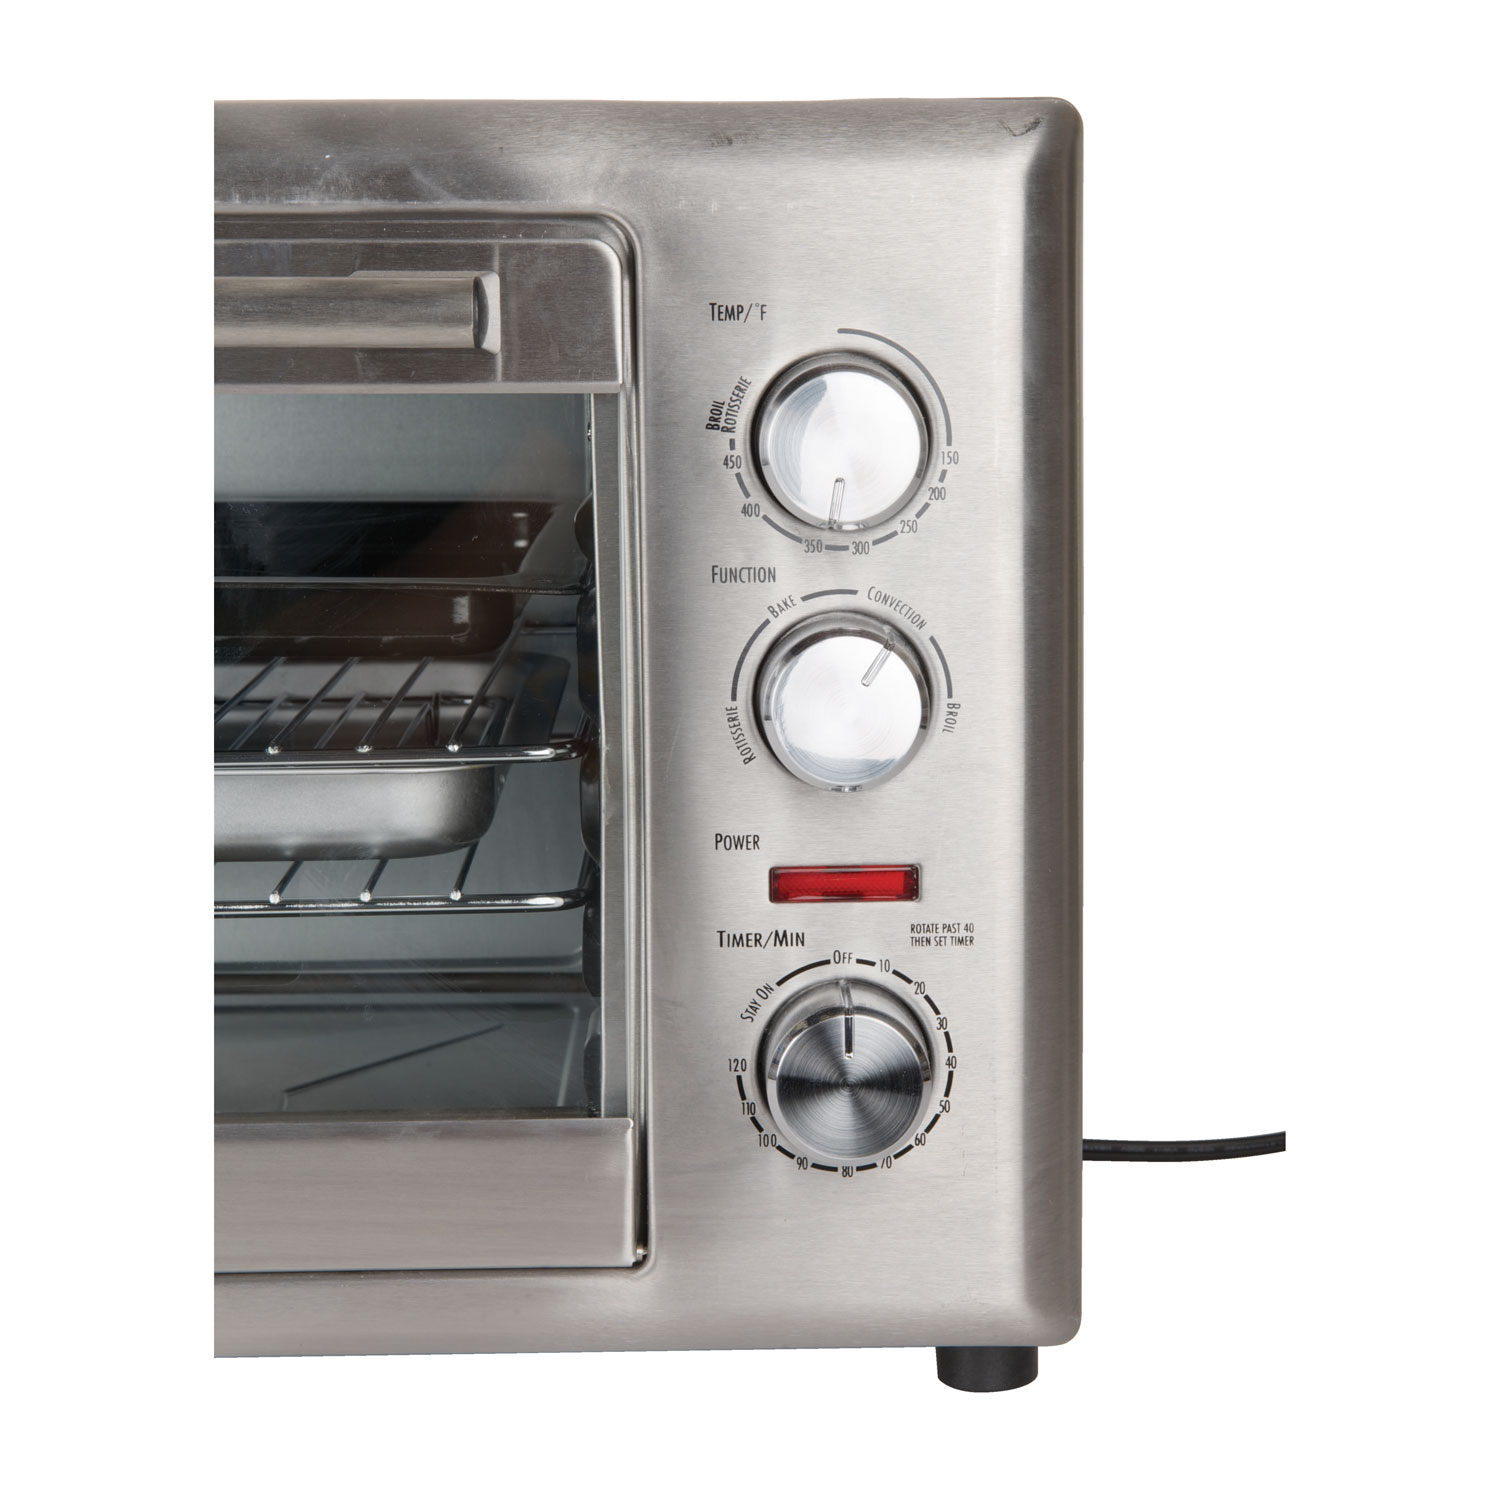 Countertop Oven - 31103 - Stainless